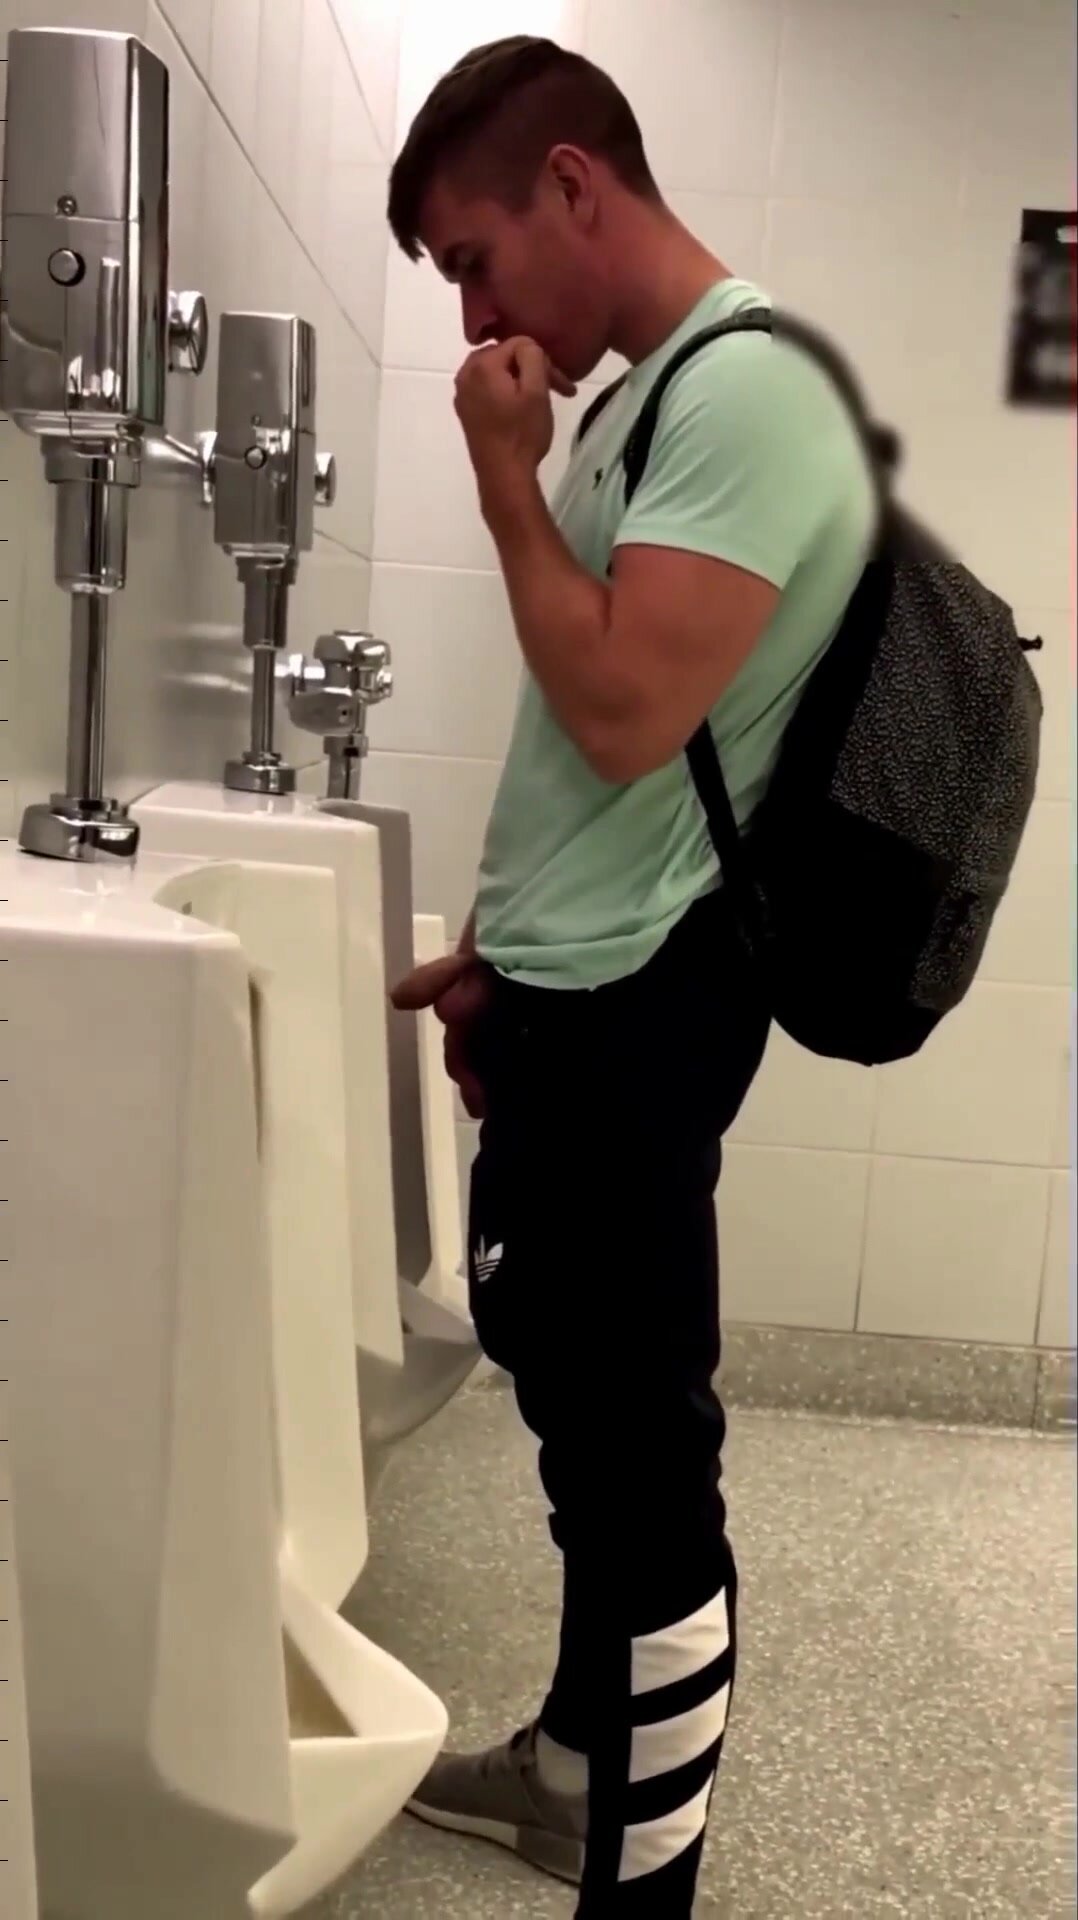 uncut dick and balls out, pissing at urinal